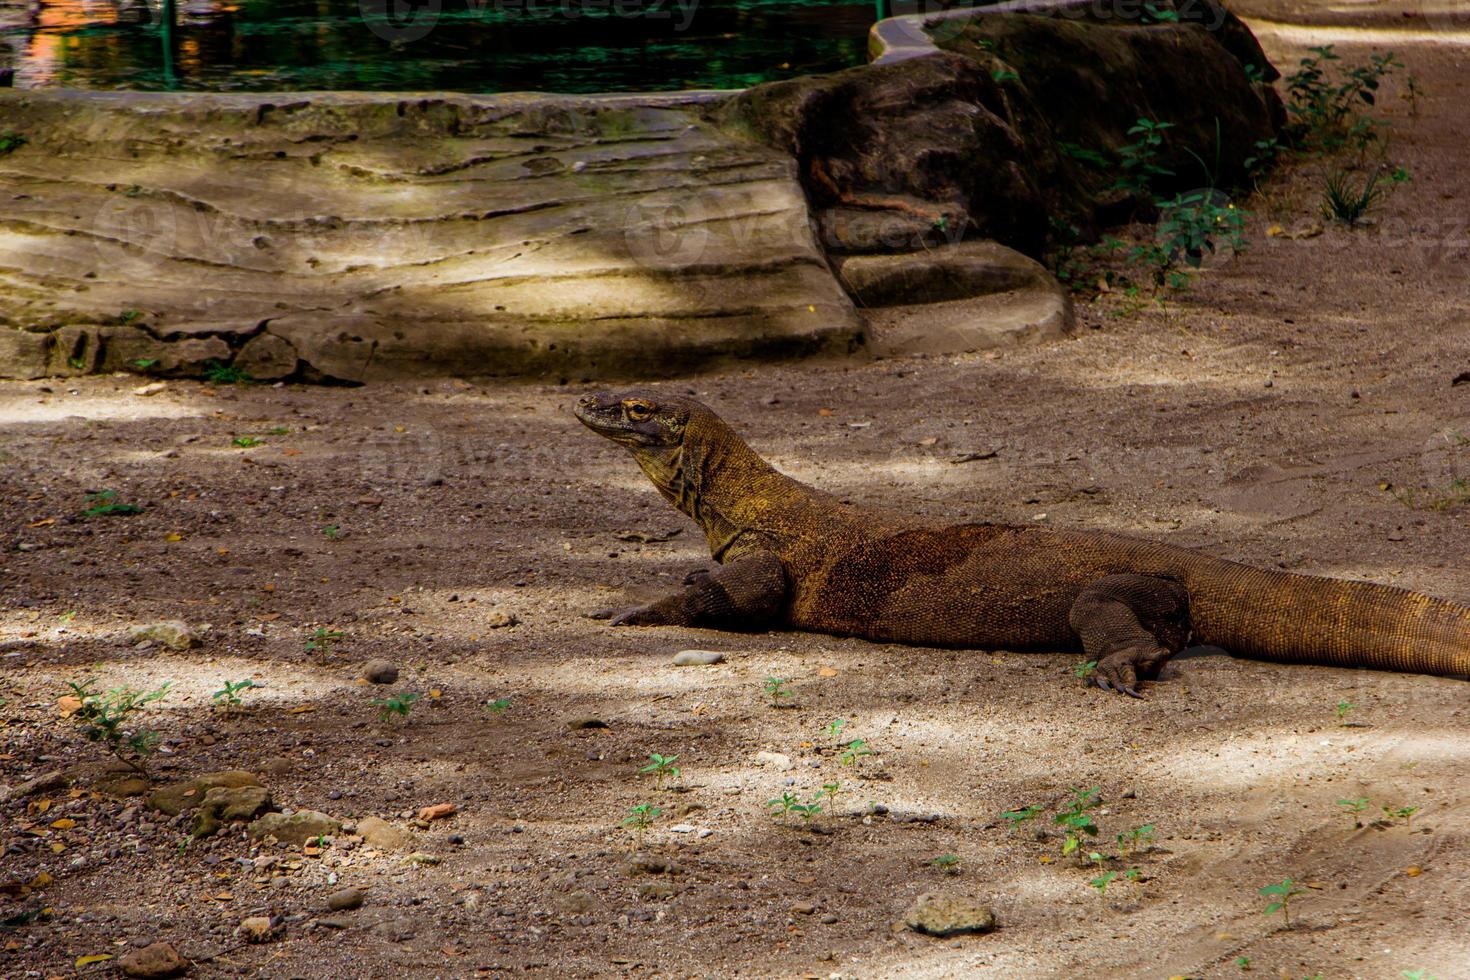 Komodo Dragon. The largest lizard in the world. The Komodo dragon is an animal protected by the Indonesian government. photo